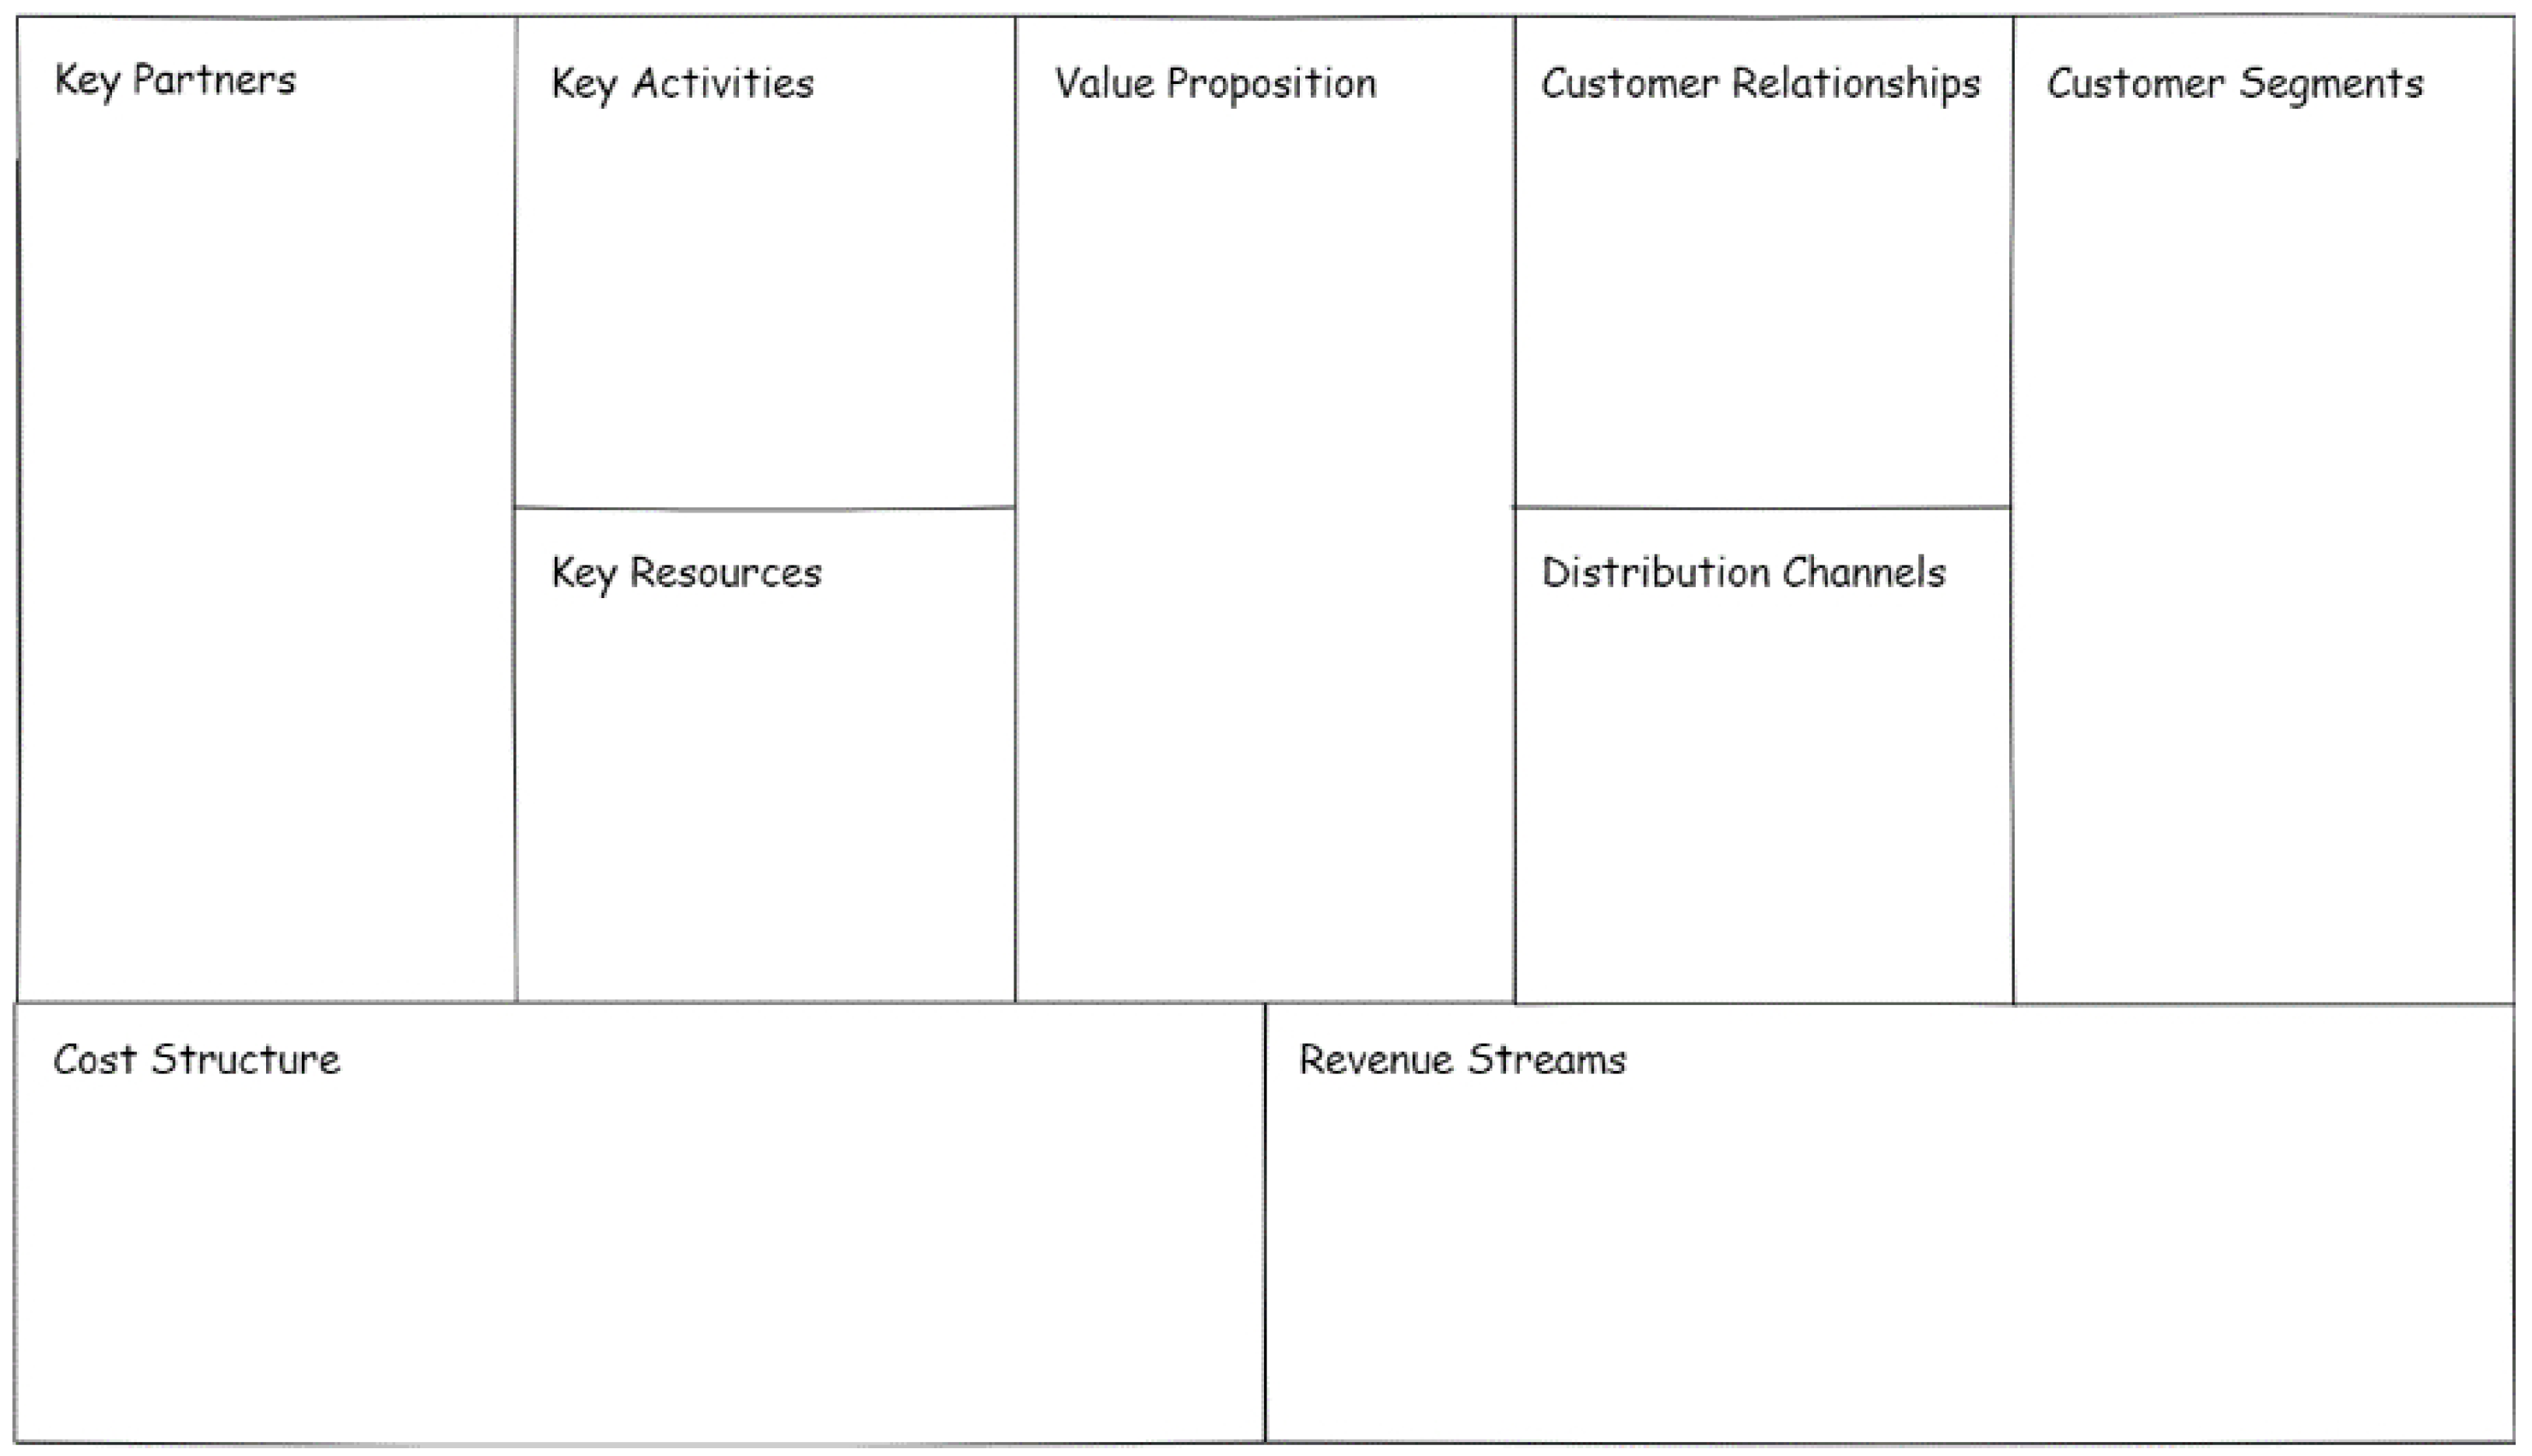 PDF) Business Model Canvas Made Easy